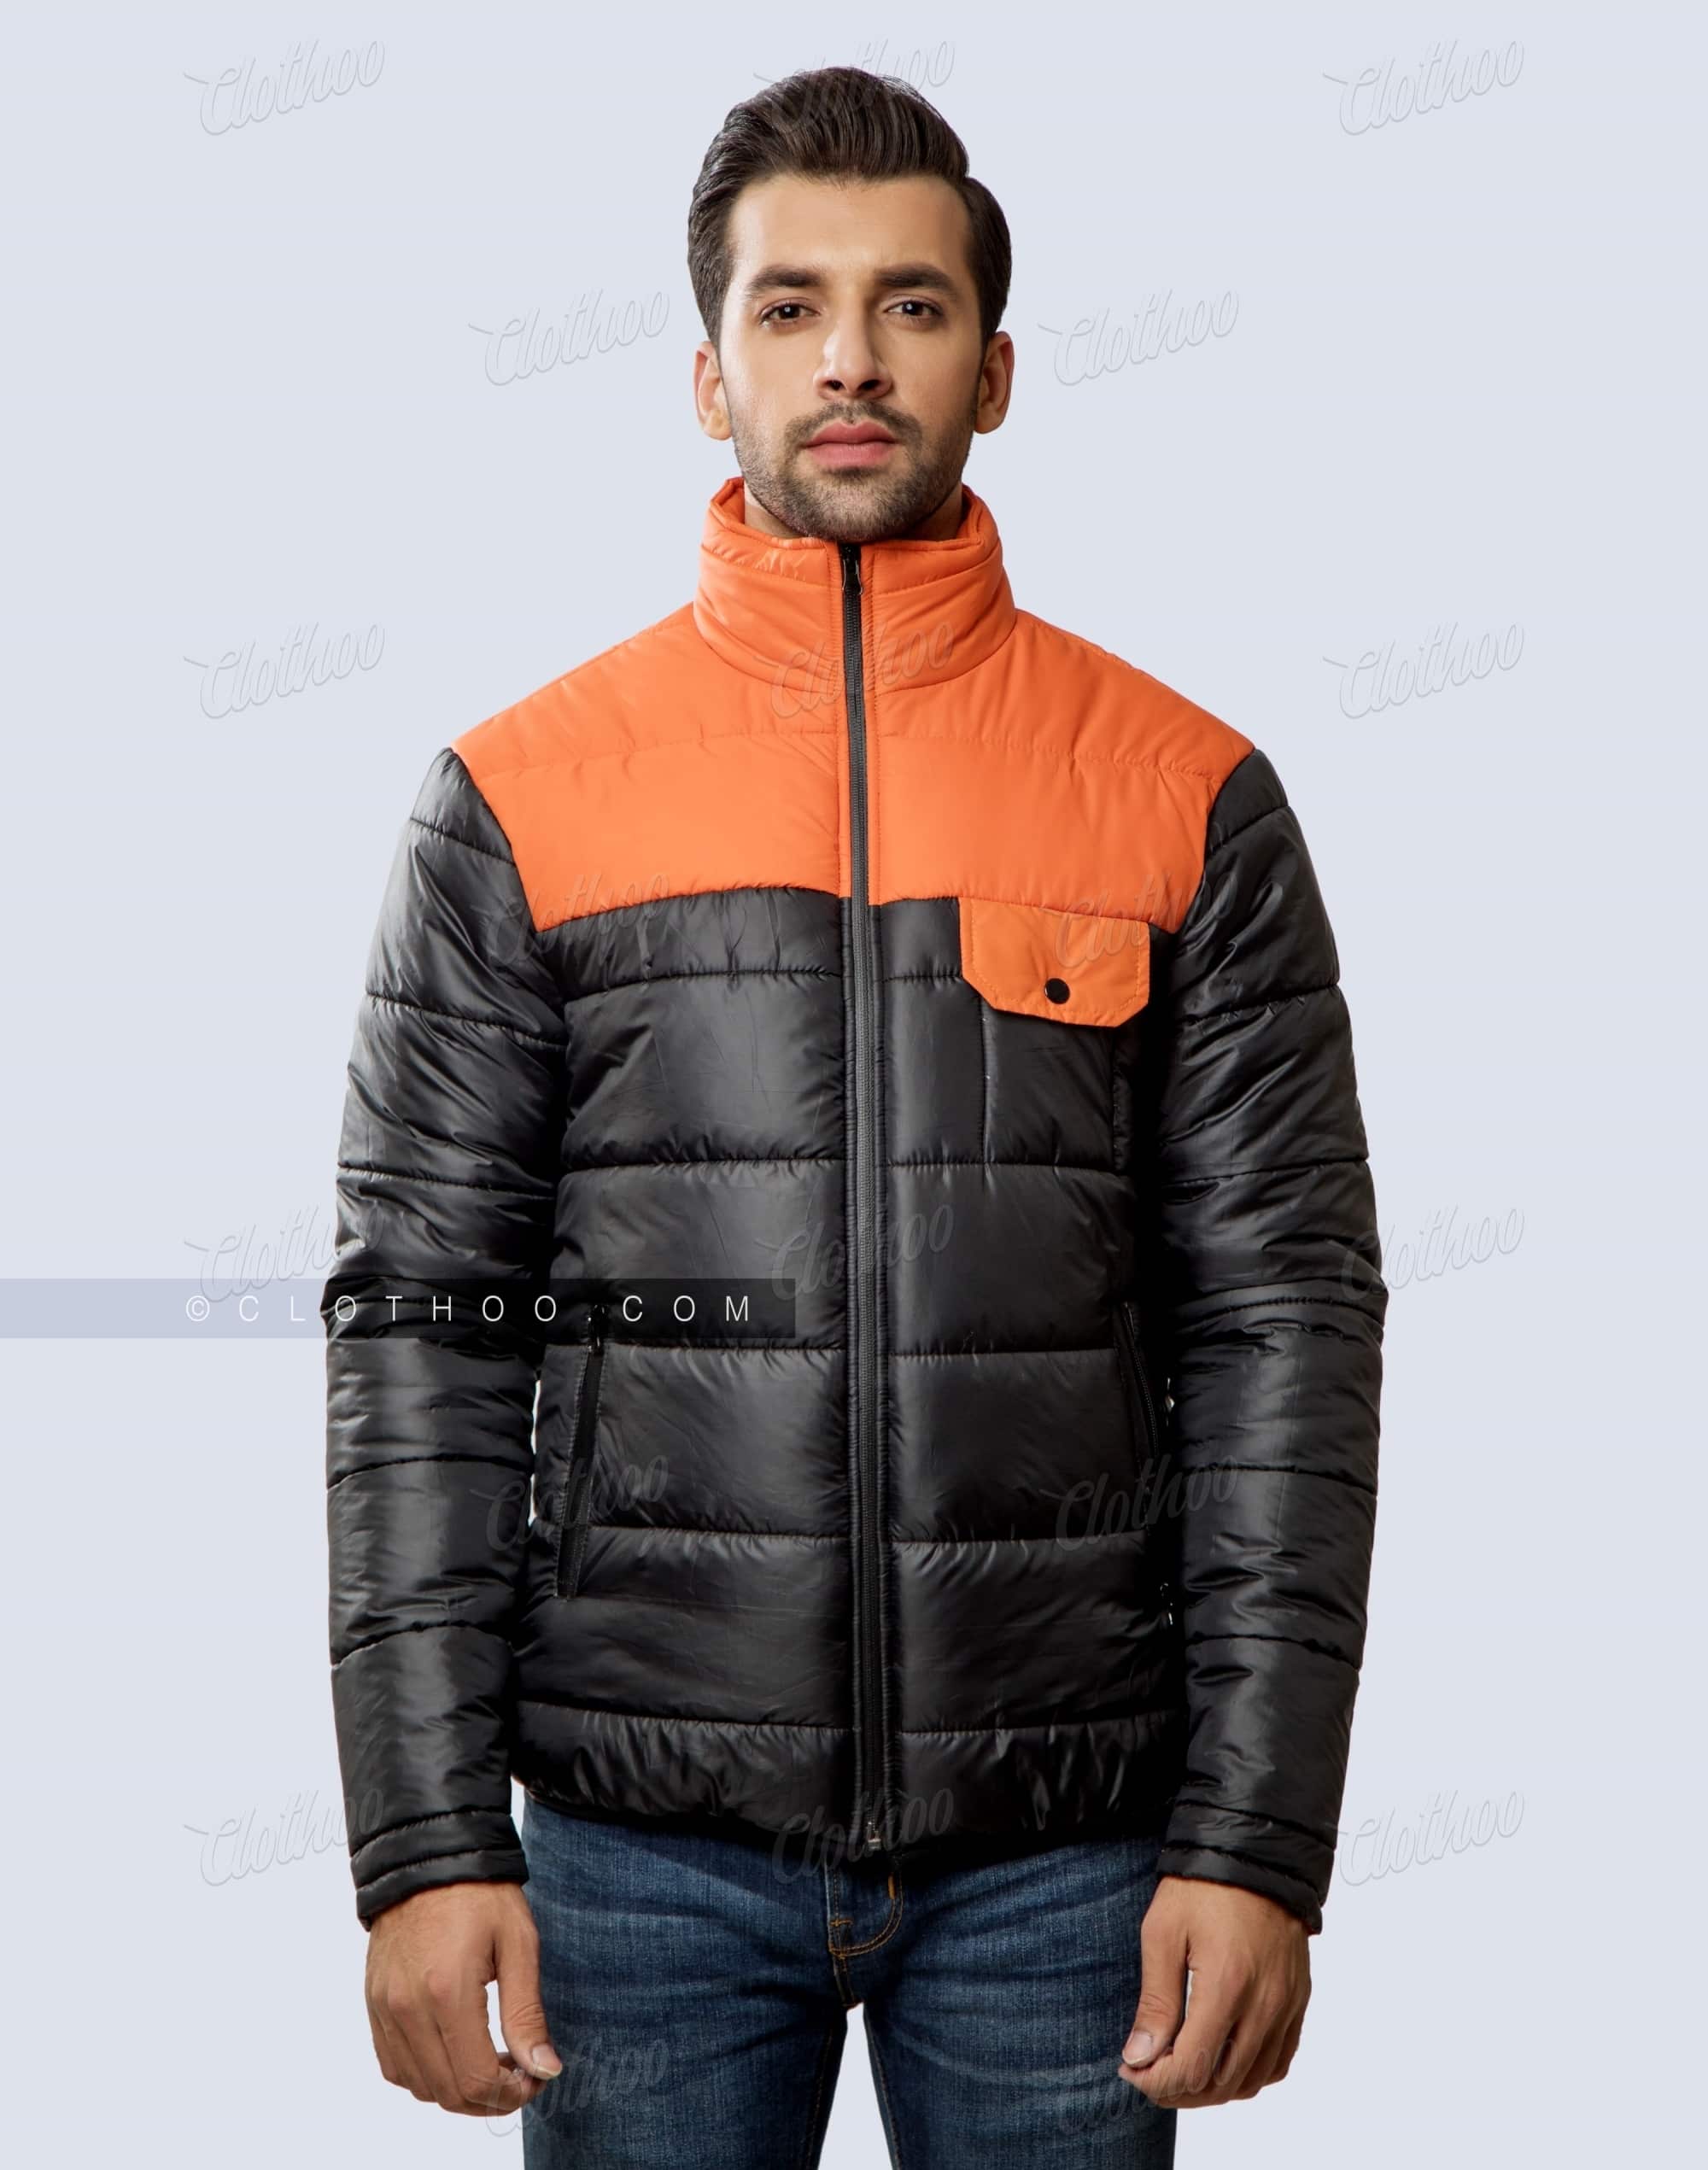 Colorblock Puffer Jacket for Men and Women